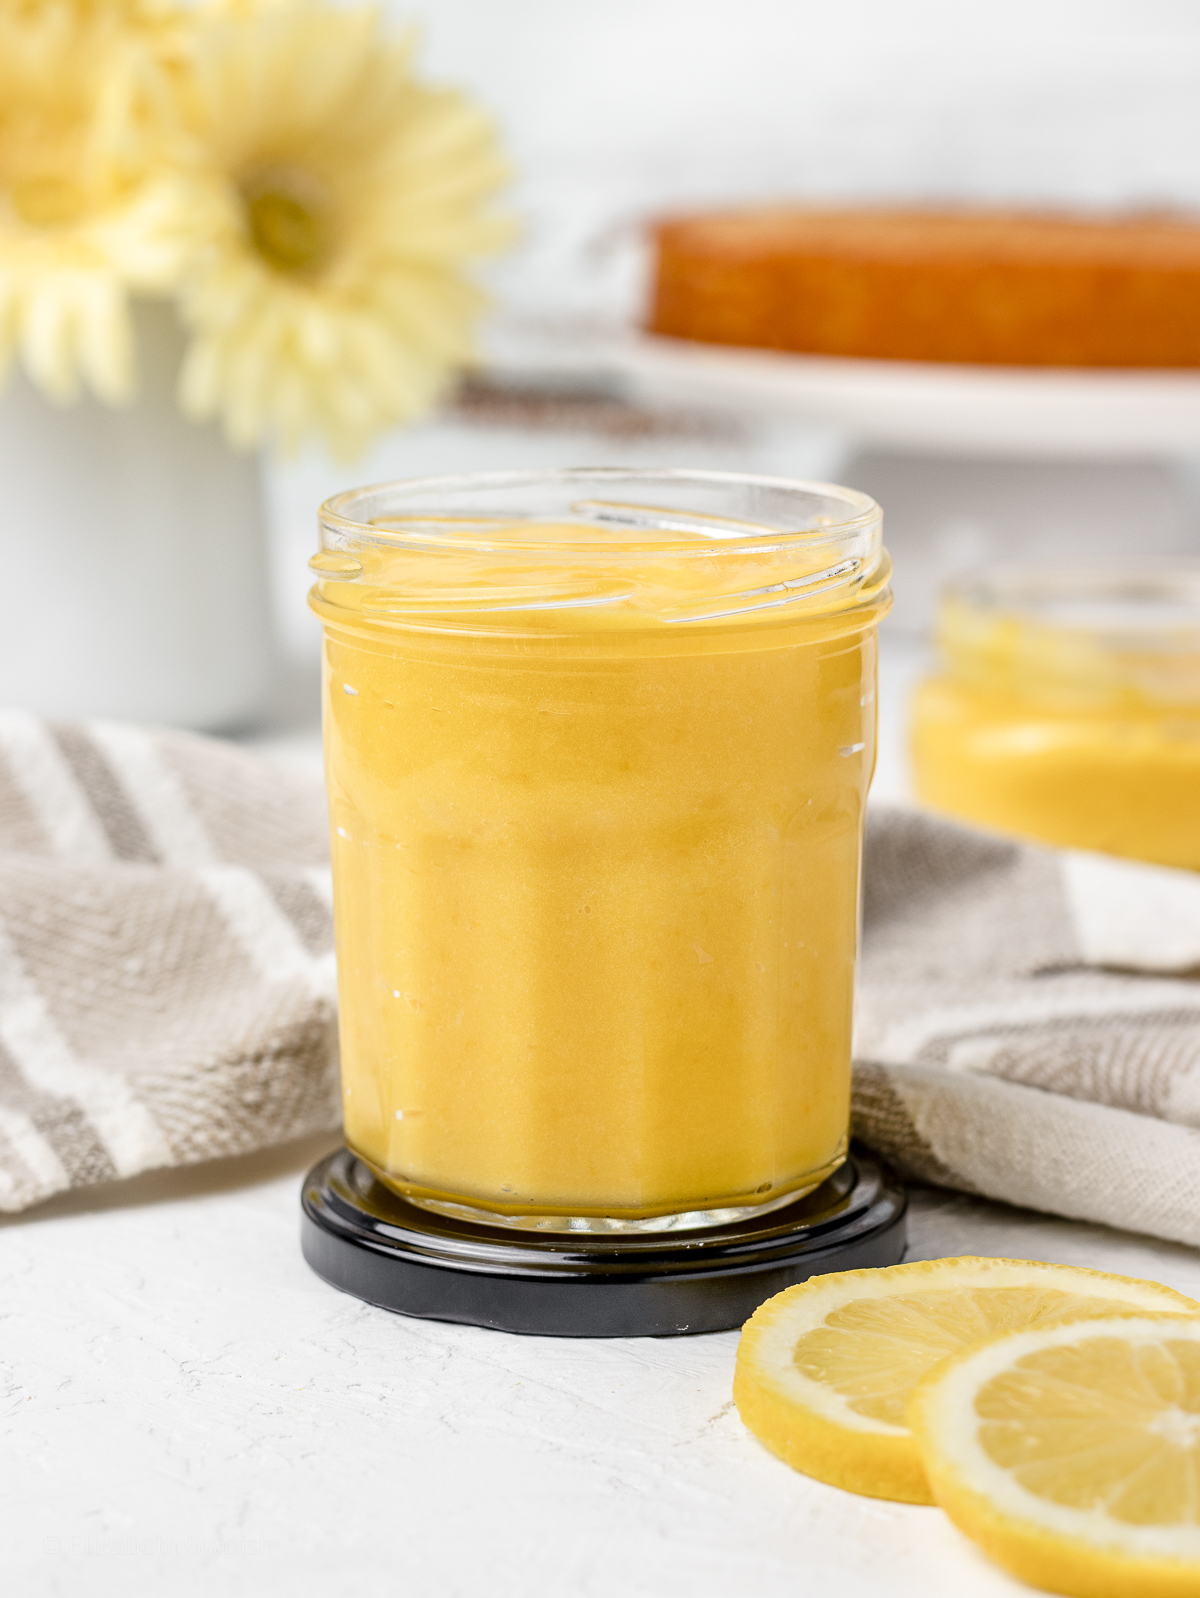 Cooked and cooled lemon curd in a jar with baked lemon cake in the background.